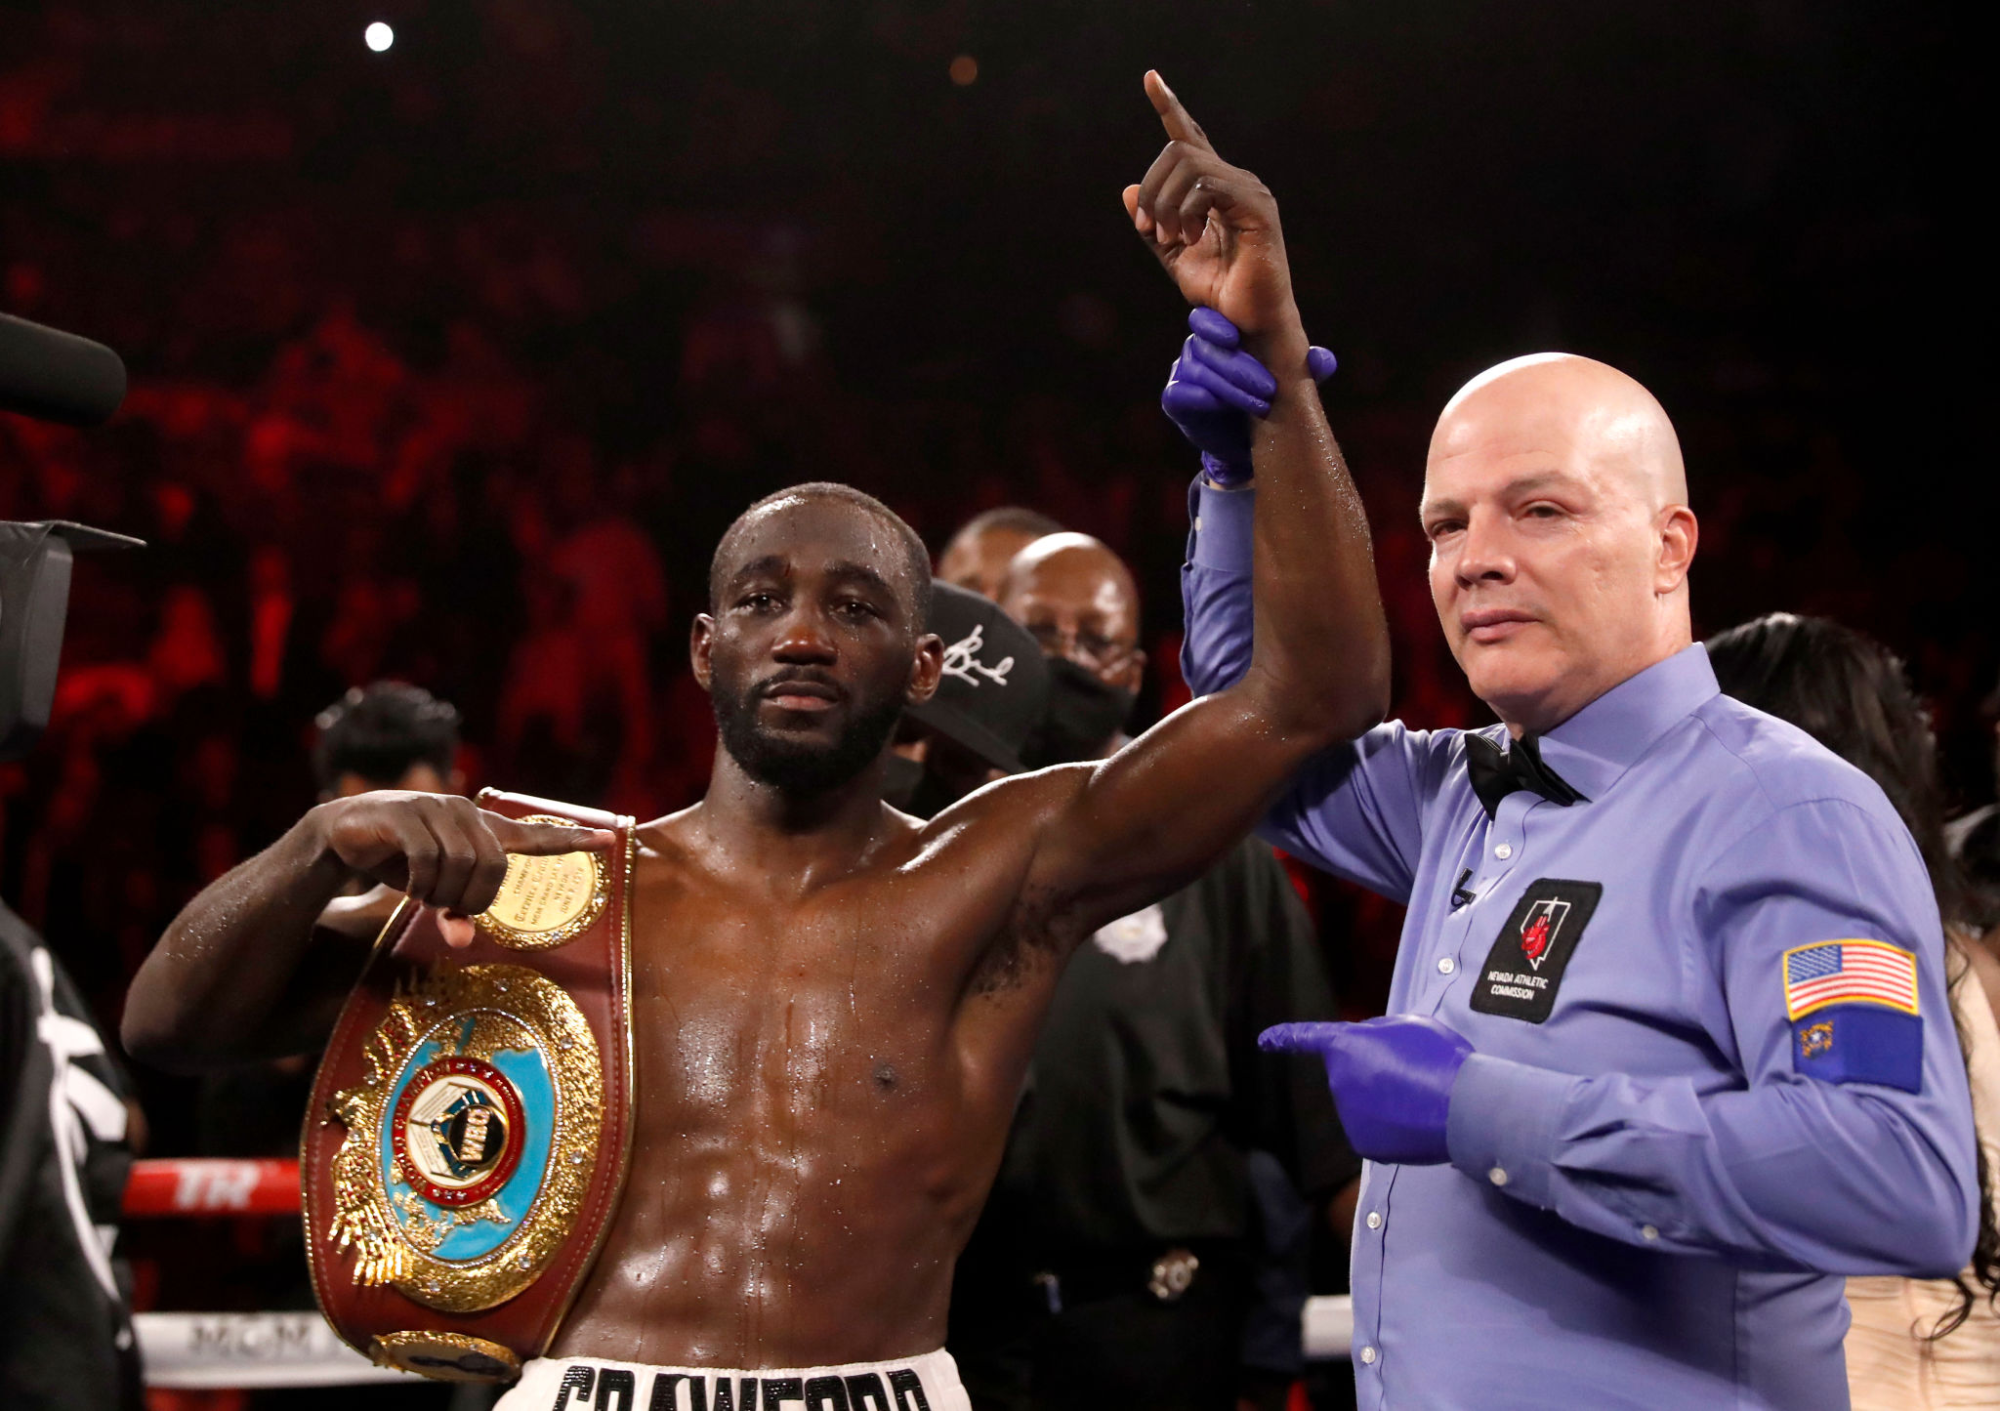 WBO champion Terence Crawford raises his hand in the air while holding a belt and posing with referee Celestino Ruiz.